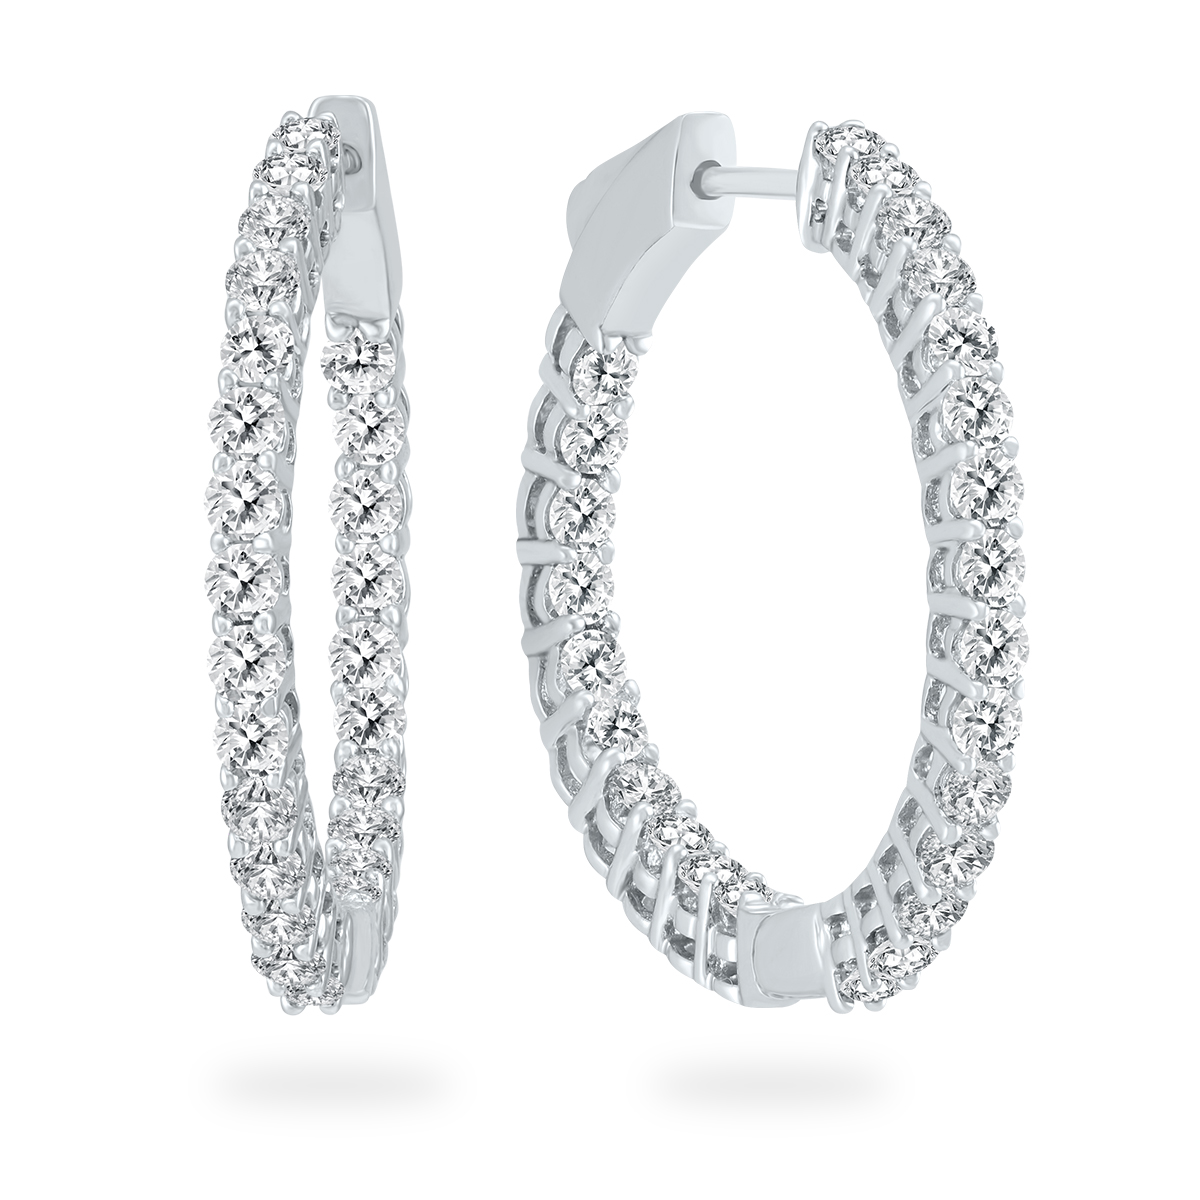 2 Carat TW Round Diamond Hoop Earrings with Push Down Button Lock in 14K White Gold